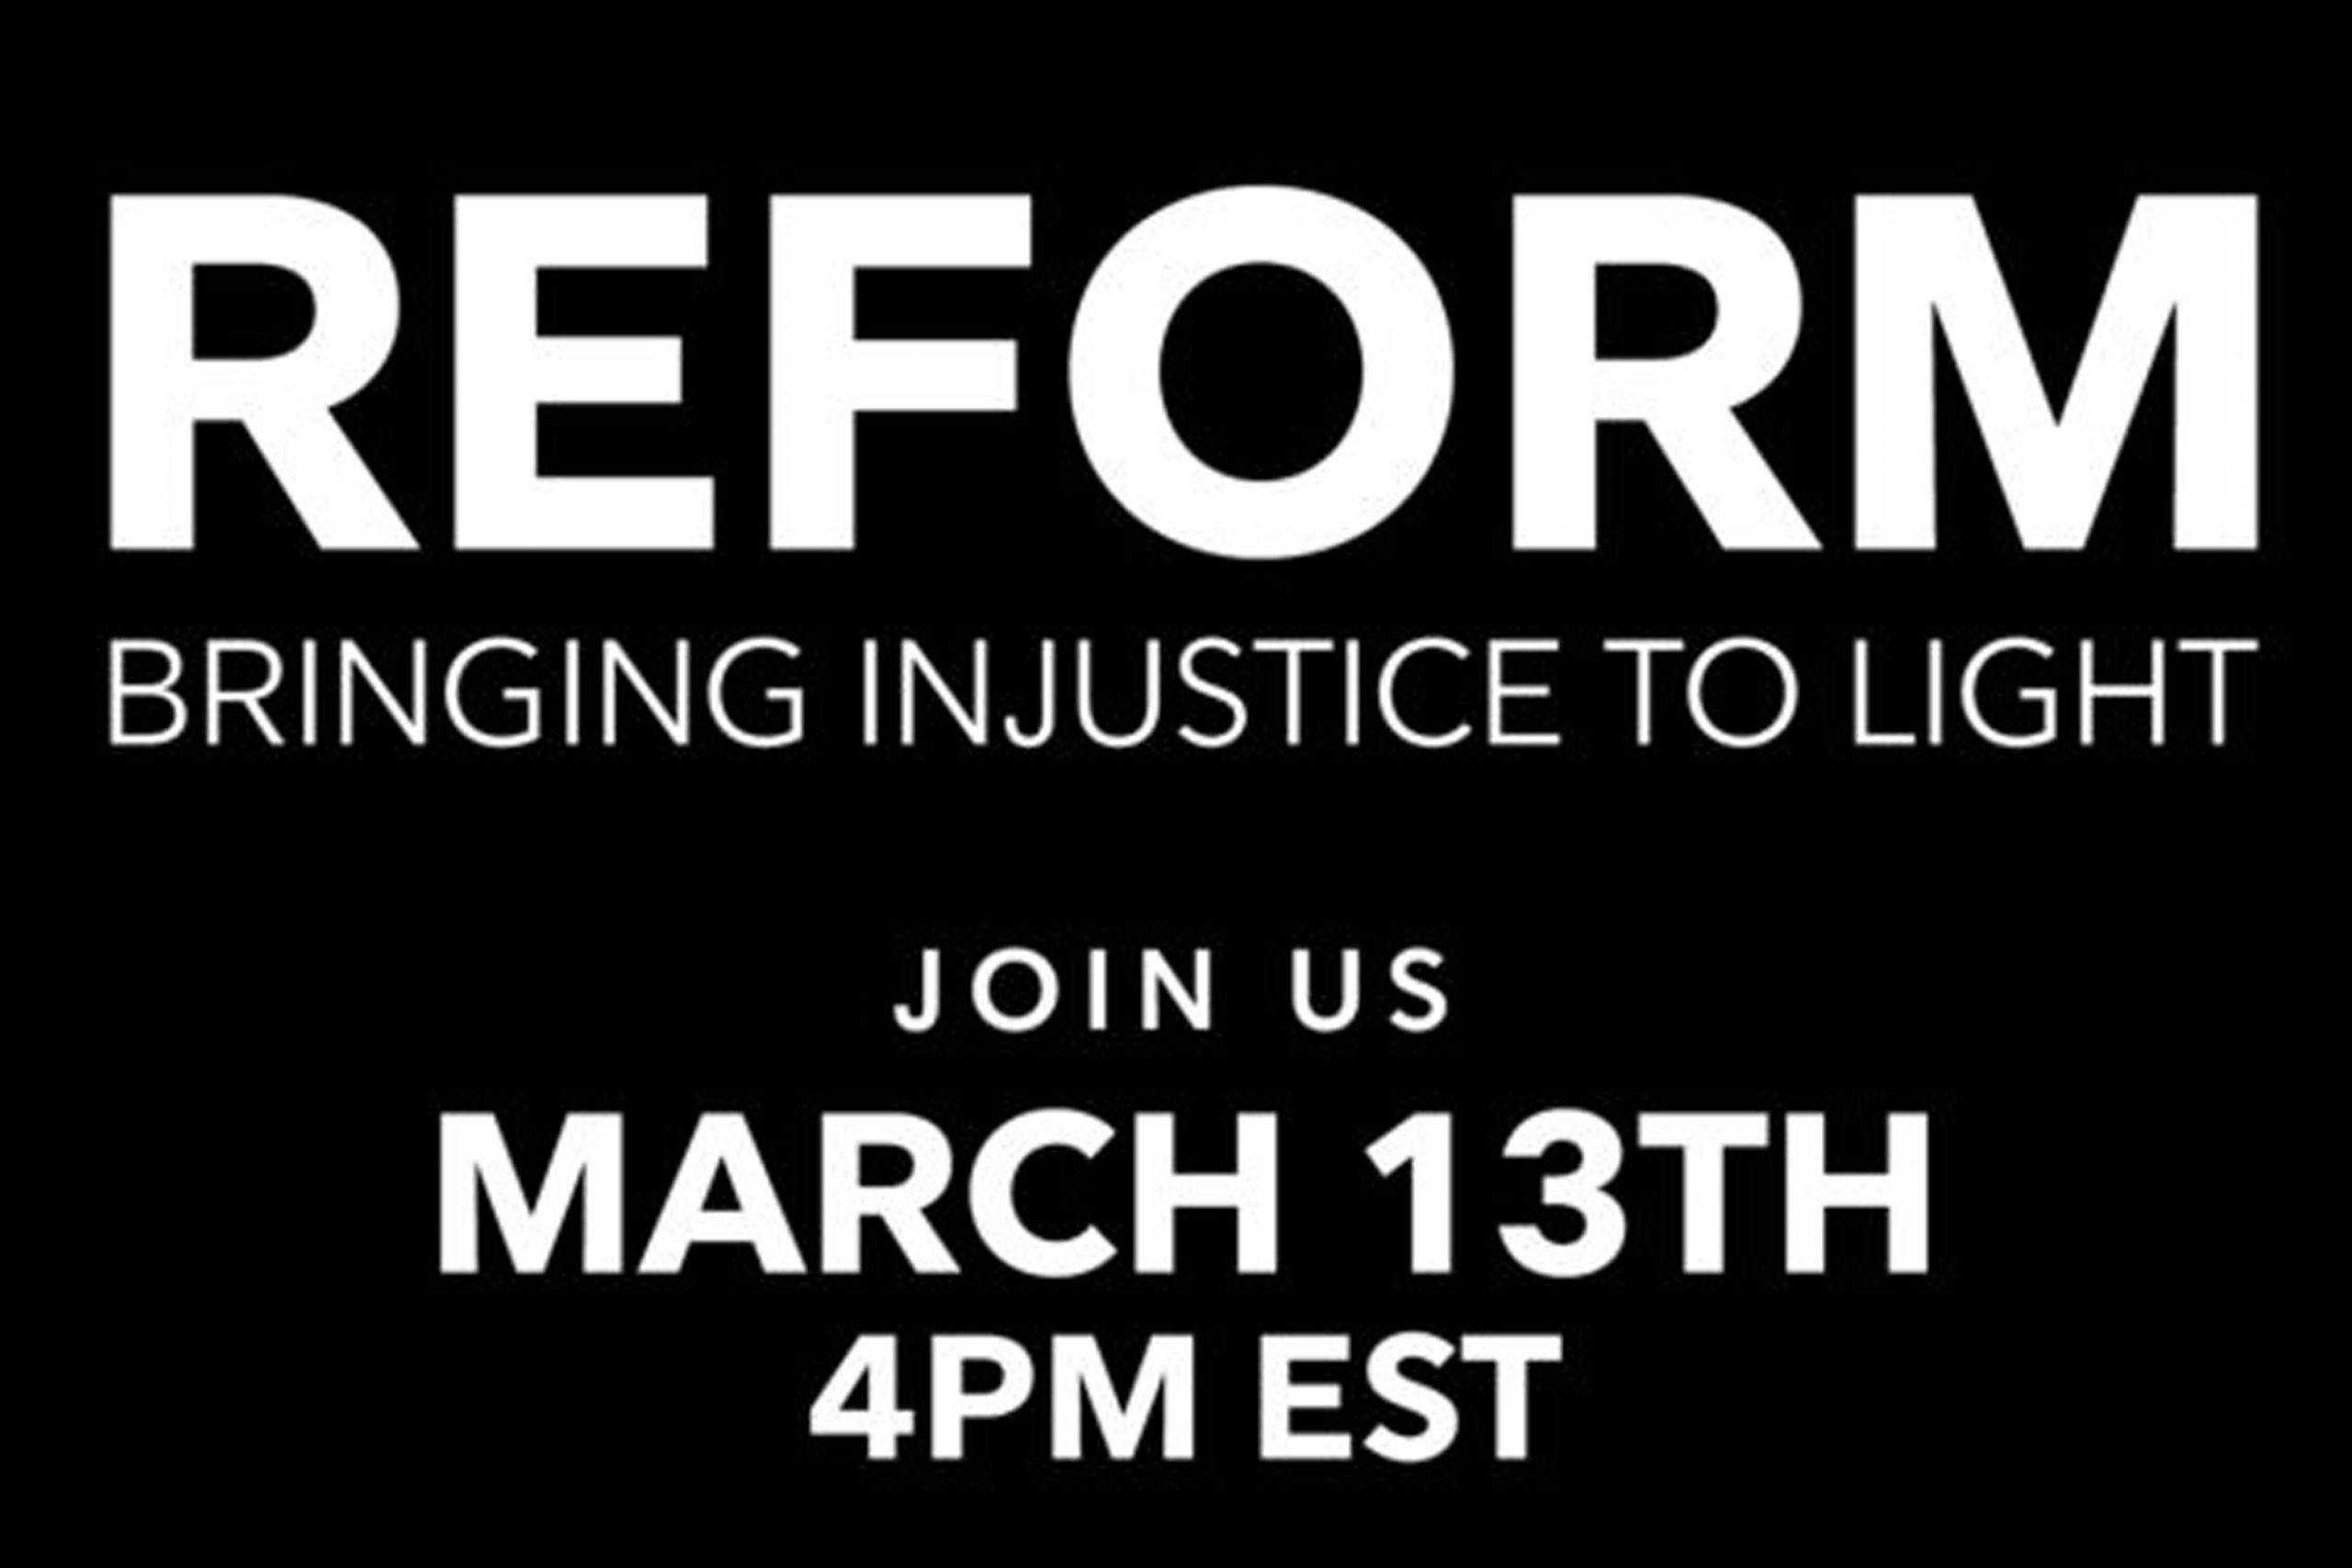 Reform Bringing Injustice to Light Join Us March 13th 4pm EST